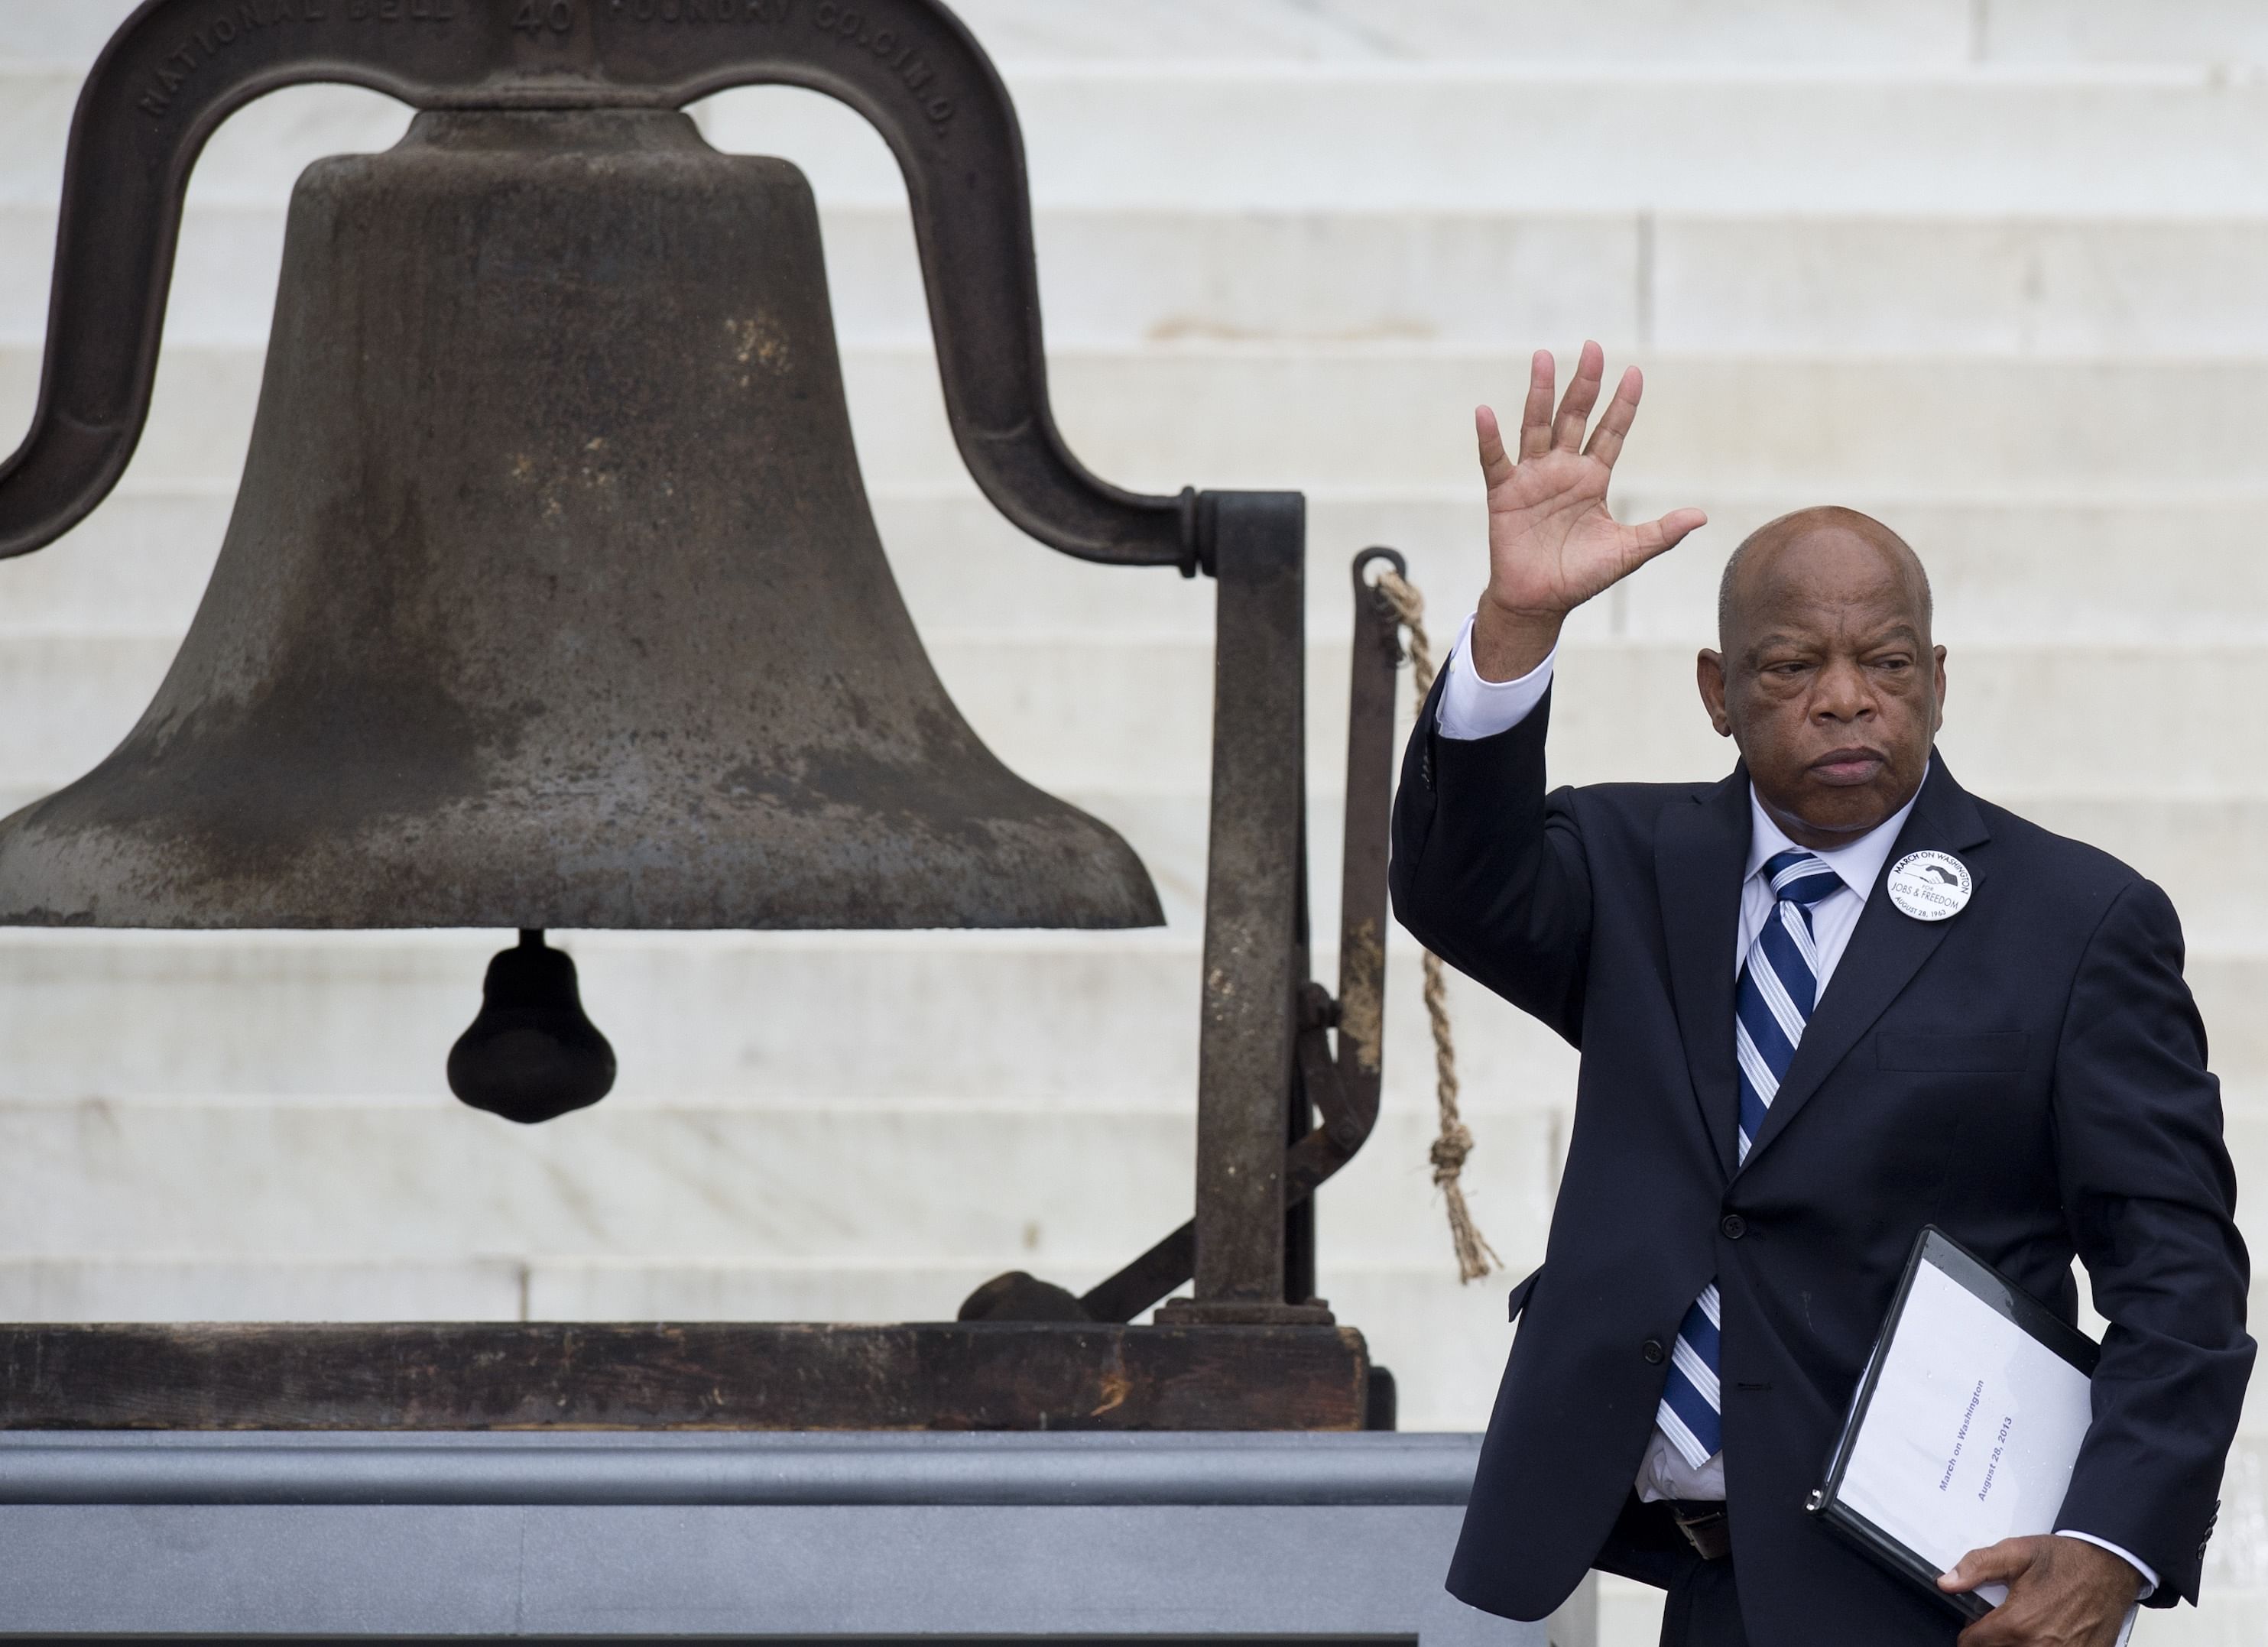 John Lewis, the non-violent civil rights warrior who marched with Martin Luther King Jr and nearly died from police beatings before serving for decades as a US congressman, has died at age 80, House colleagues said July 17, 2020. In December 2019, he was diagnosed with pancreatic cancer. Credit: AFP